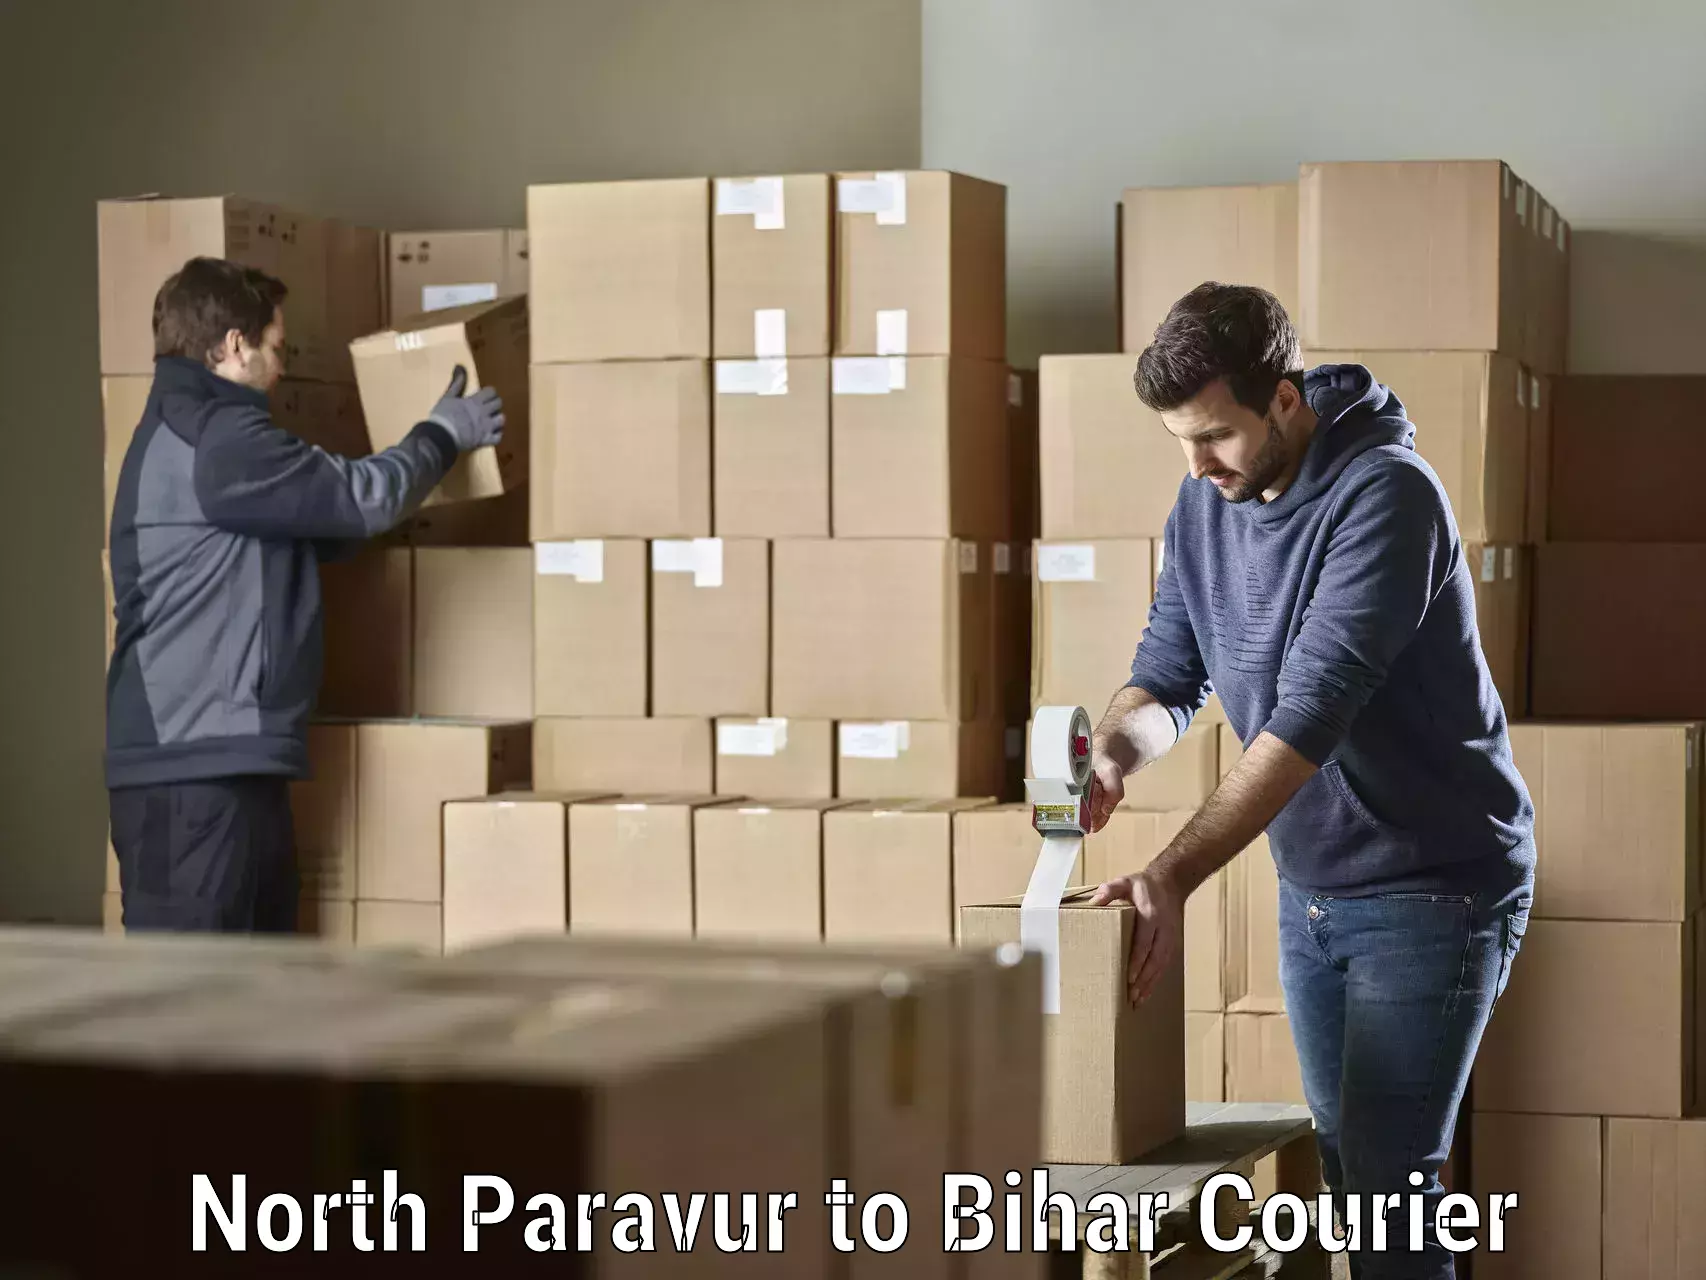 Courier service partnerships in North Paravur to Dhaka